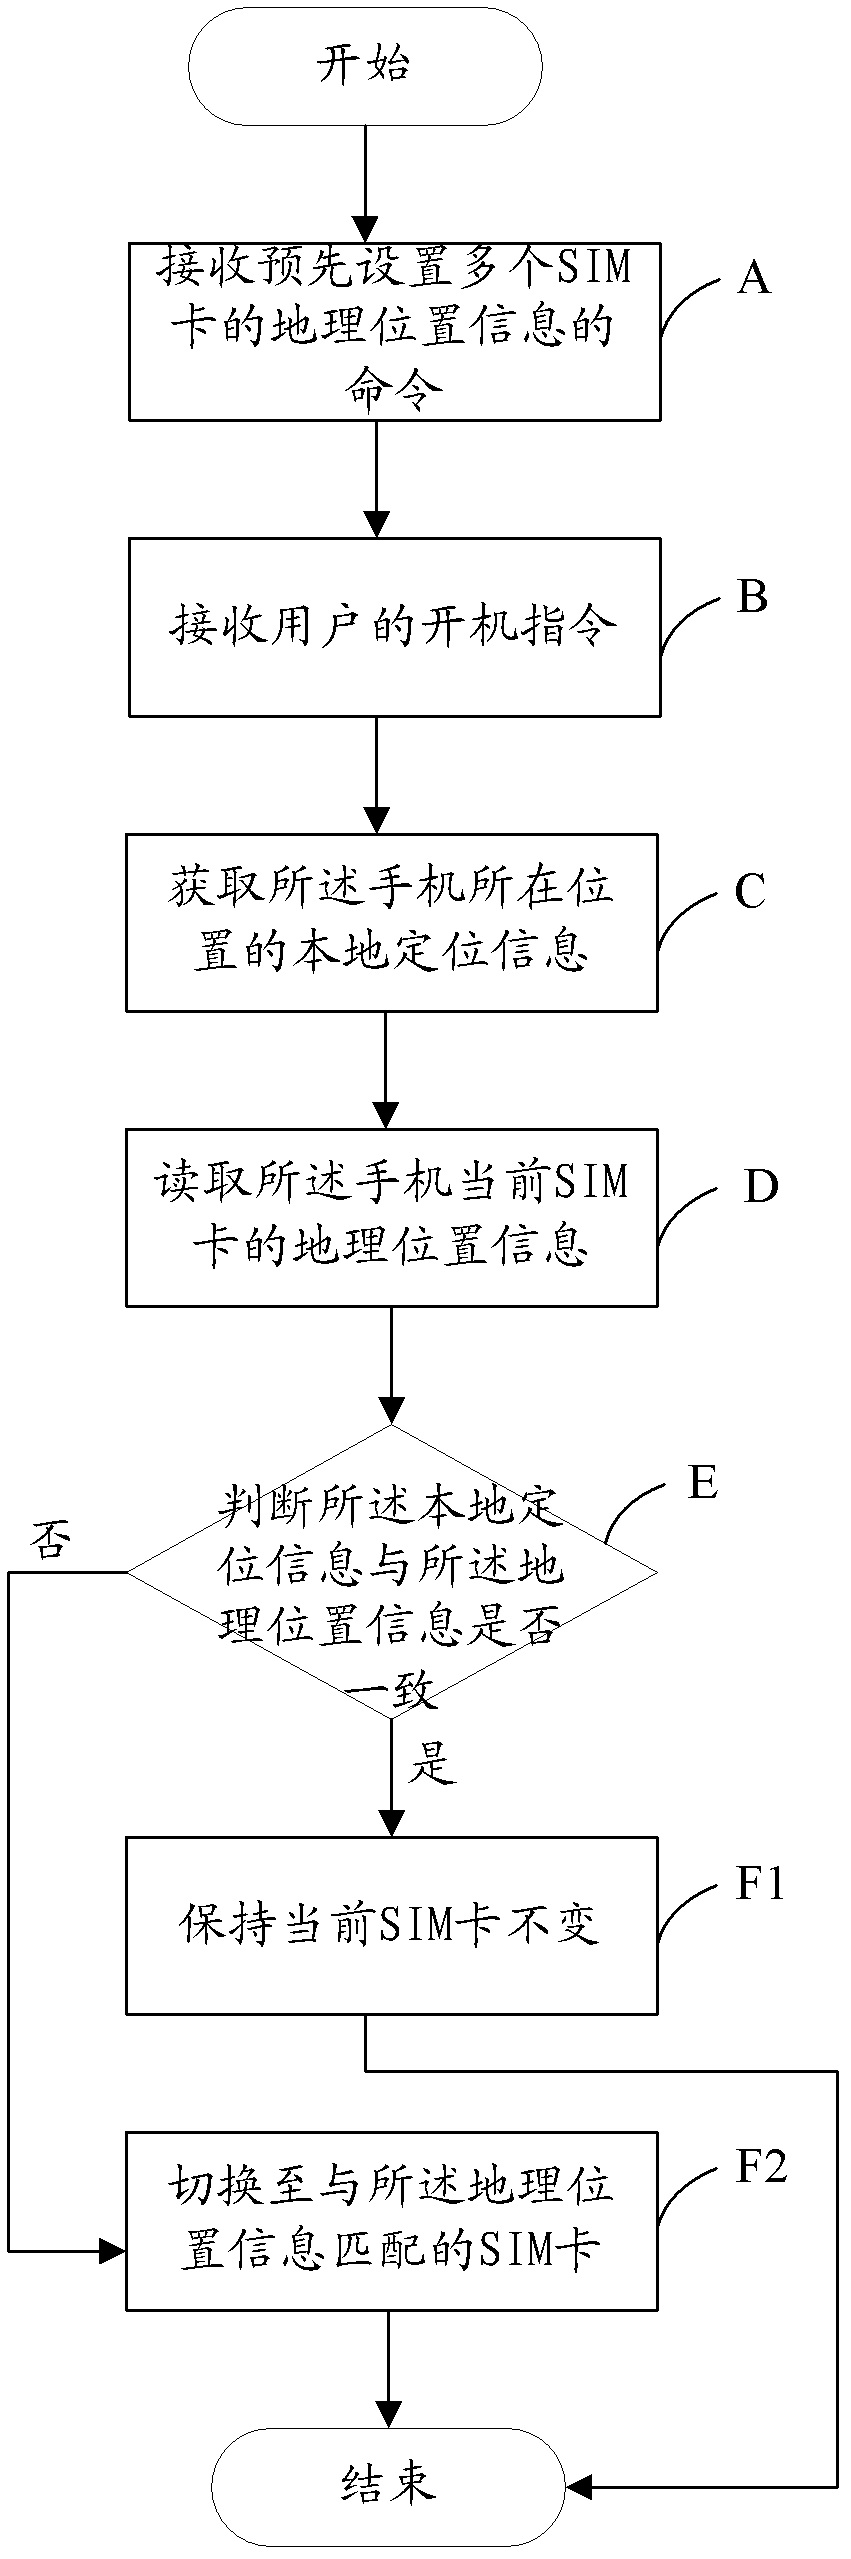 Method and device of recommending network for mobile phone